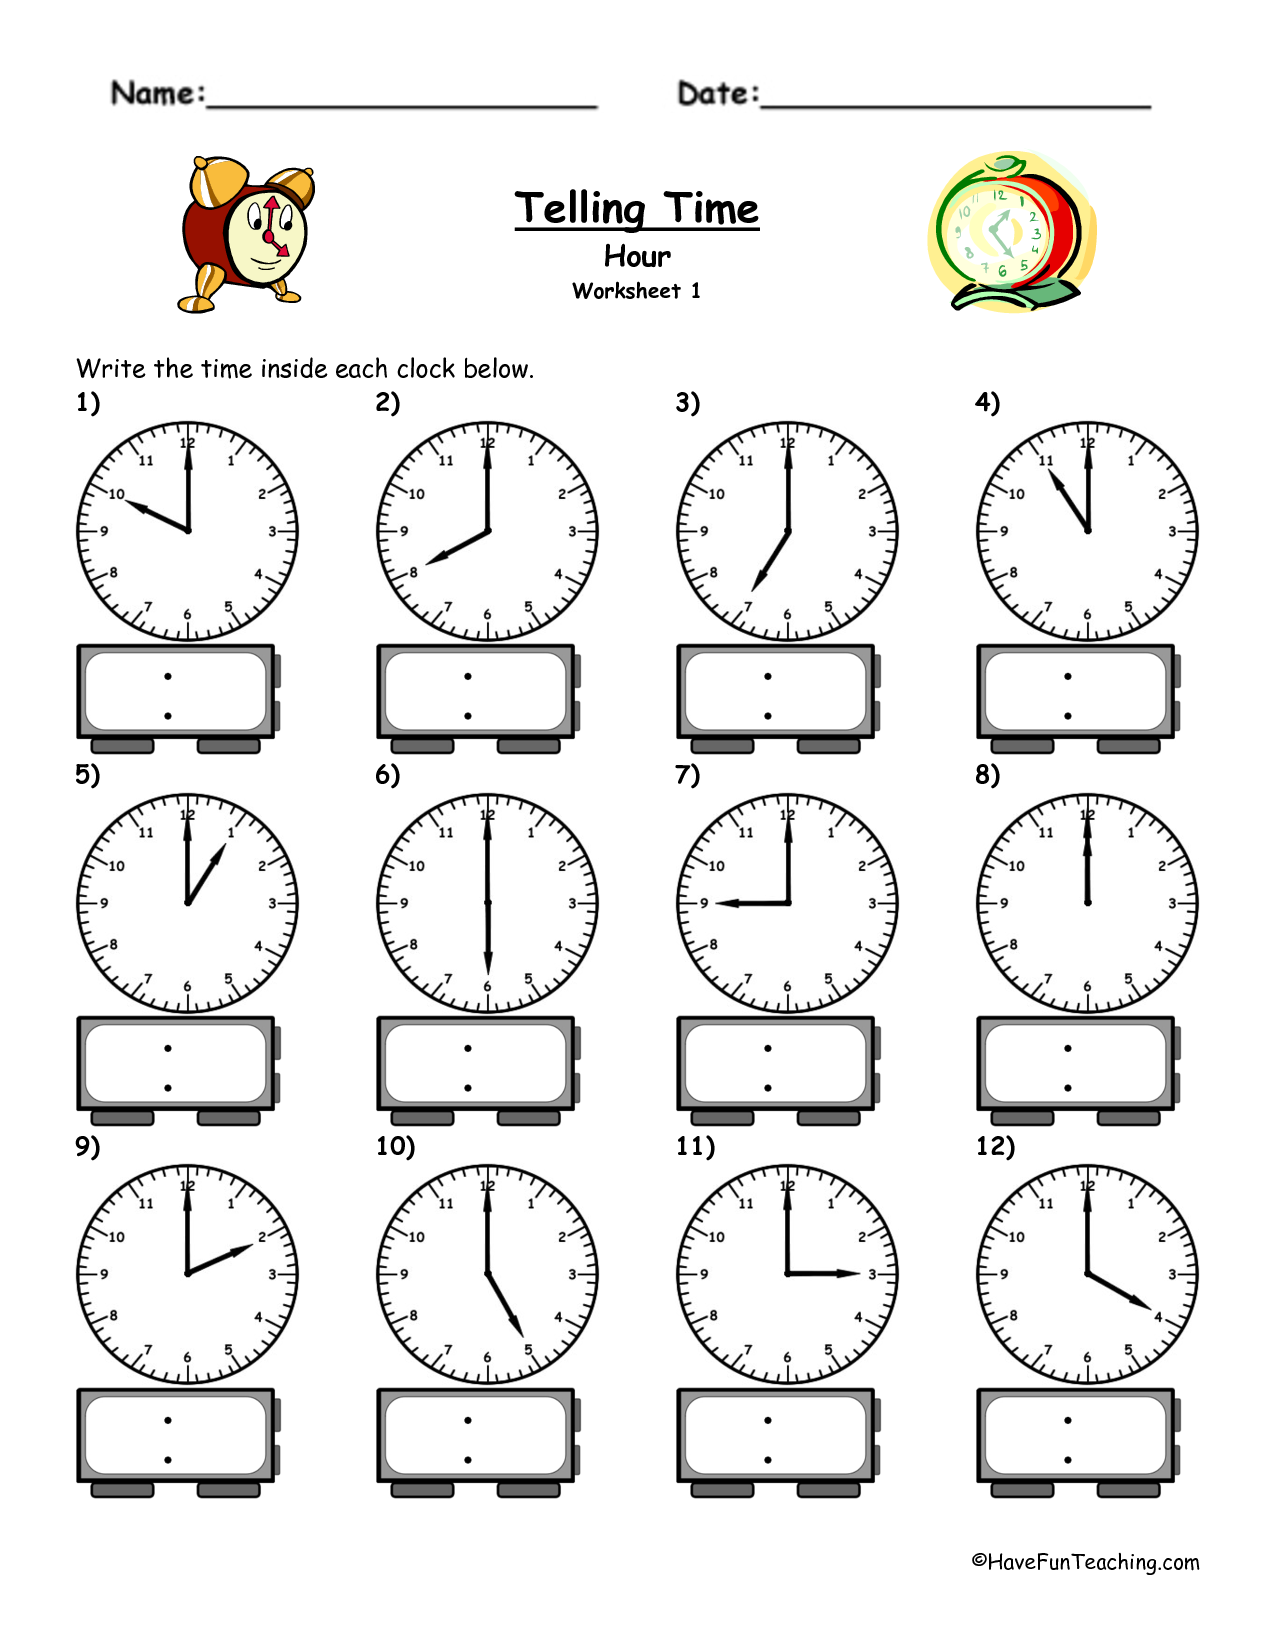 26-free-printable-telling-time-worksheets-stock-rugby-rumilly